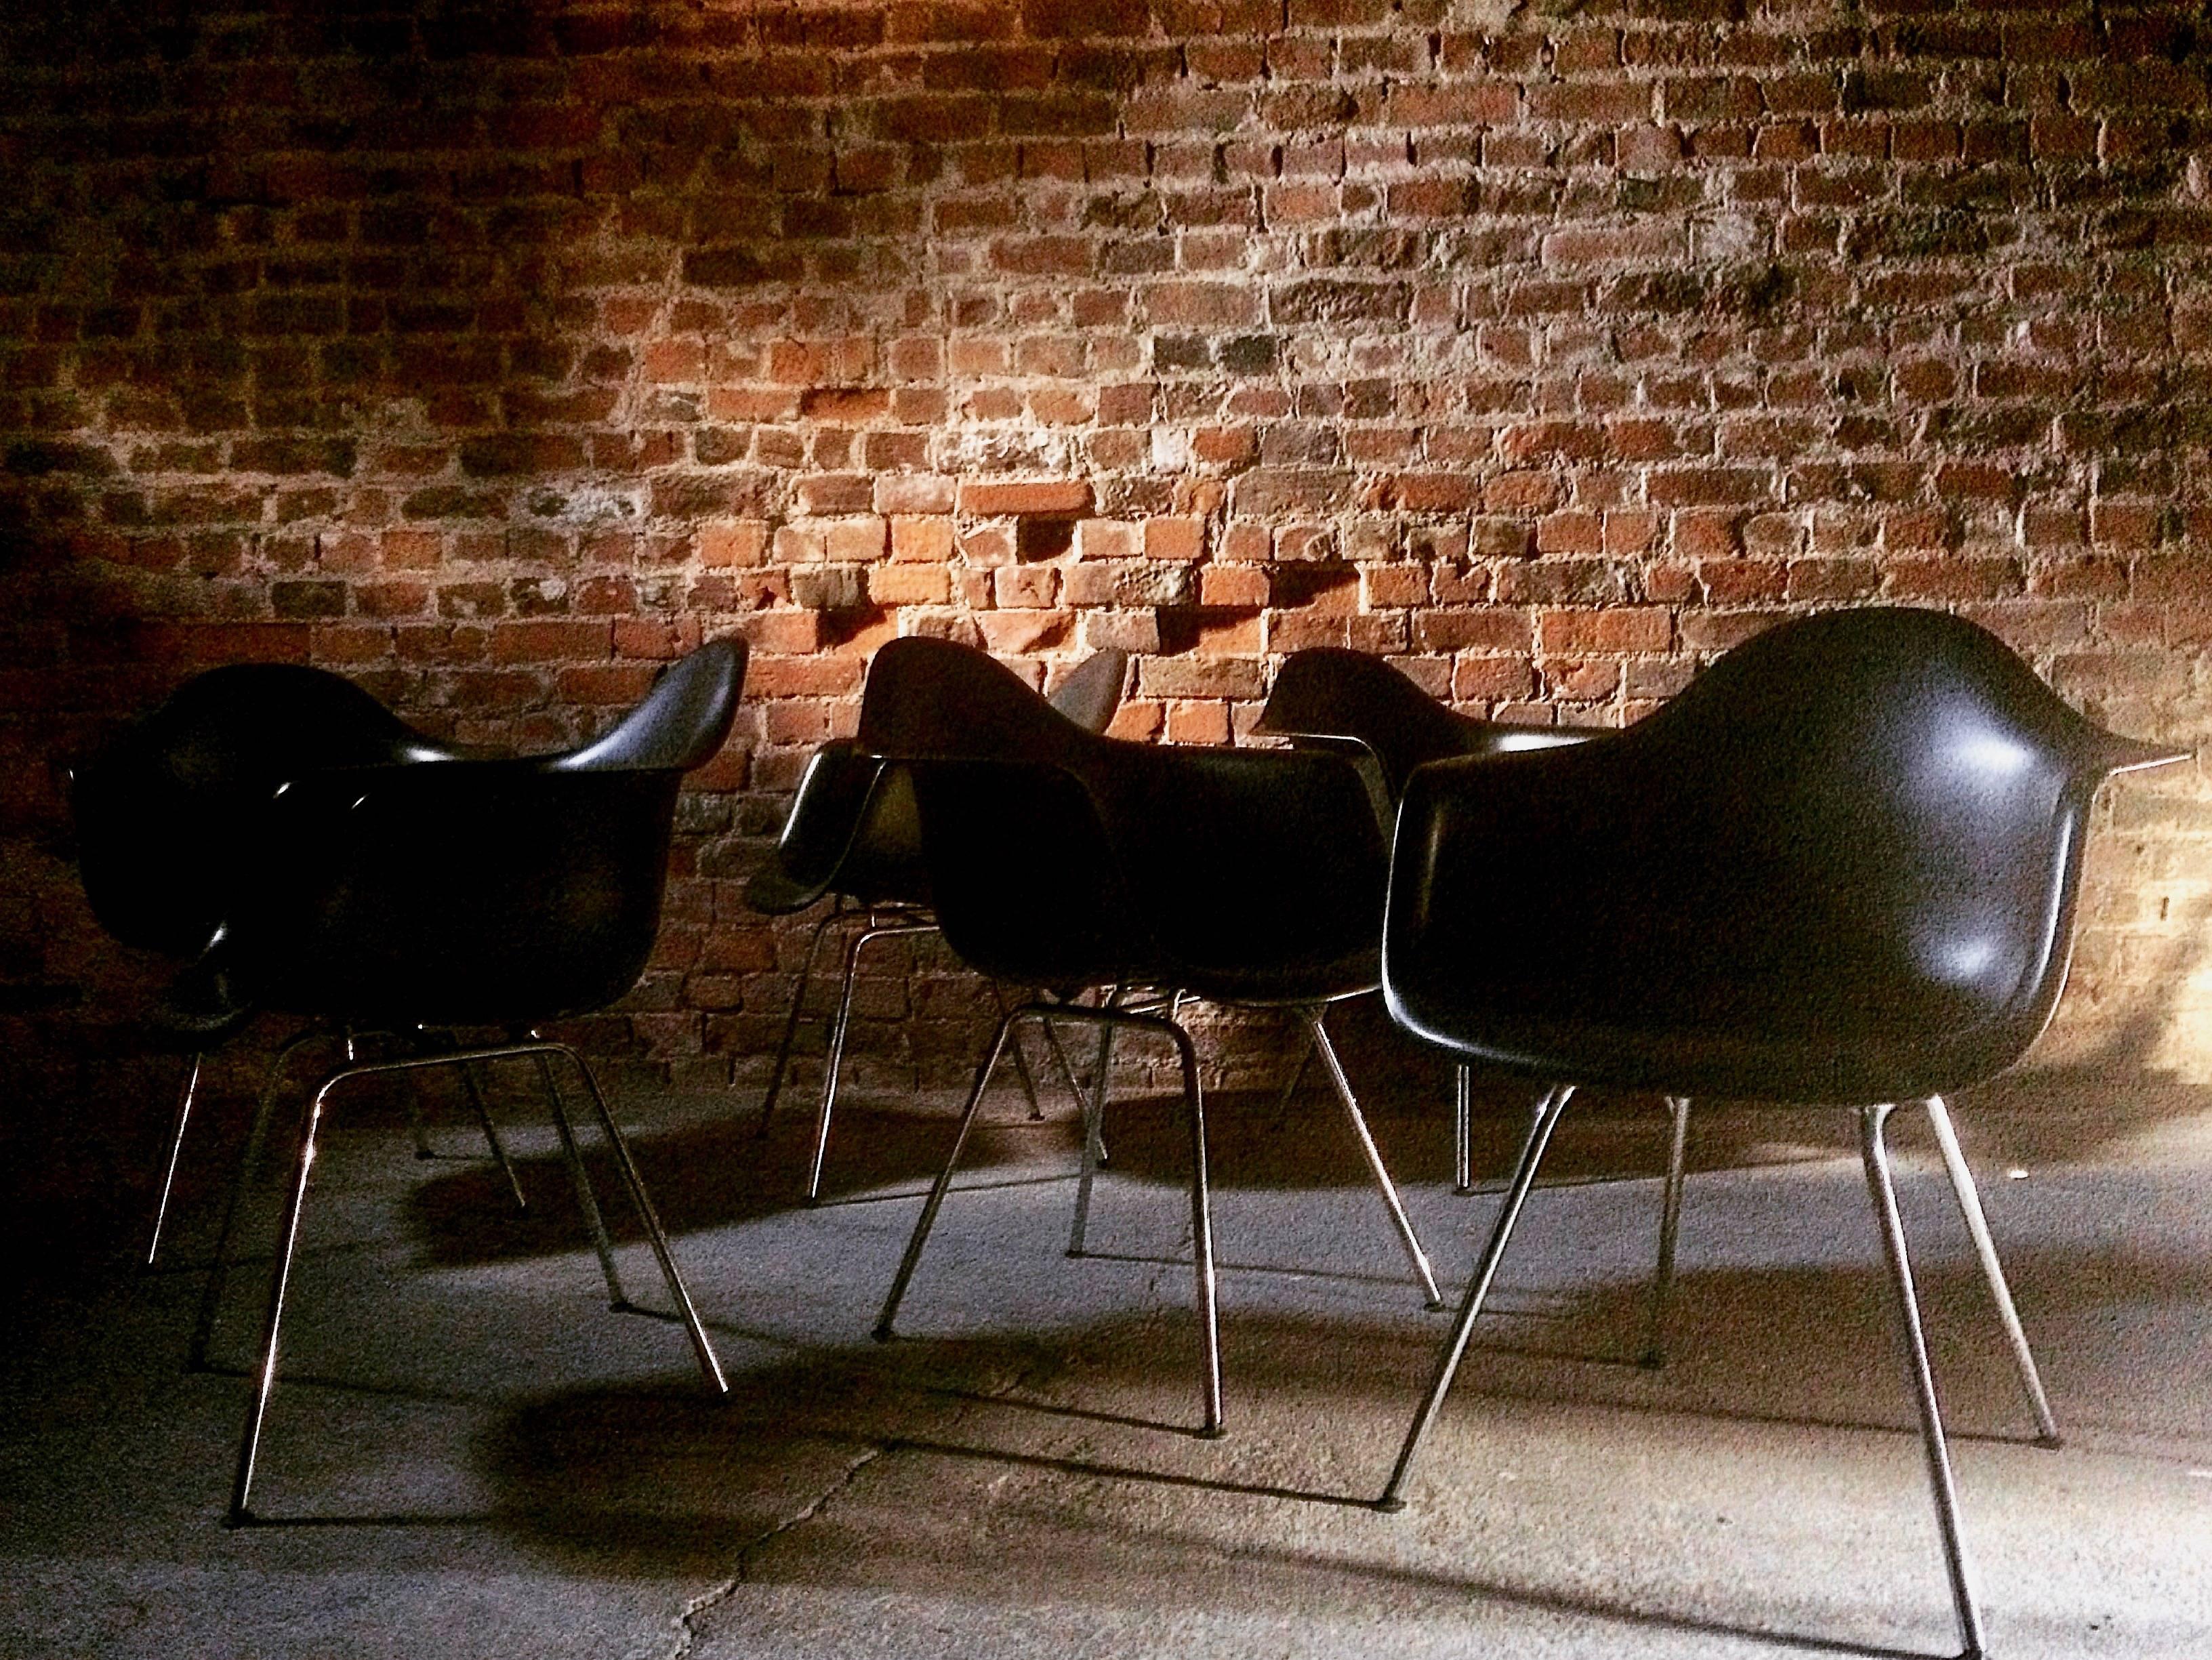 A stunning set of six original vitra DAX chairs in black, the plastic chairs designed by Charles and Ray Eames in 1950 were the very first chairs to be developed out of plastic for Industrial Production. Their organically shaped seat shells are